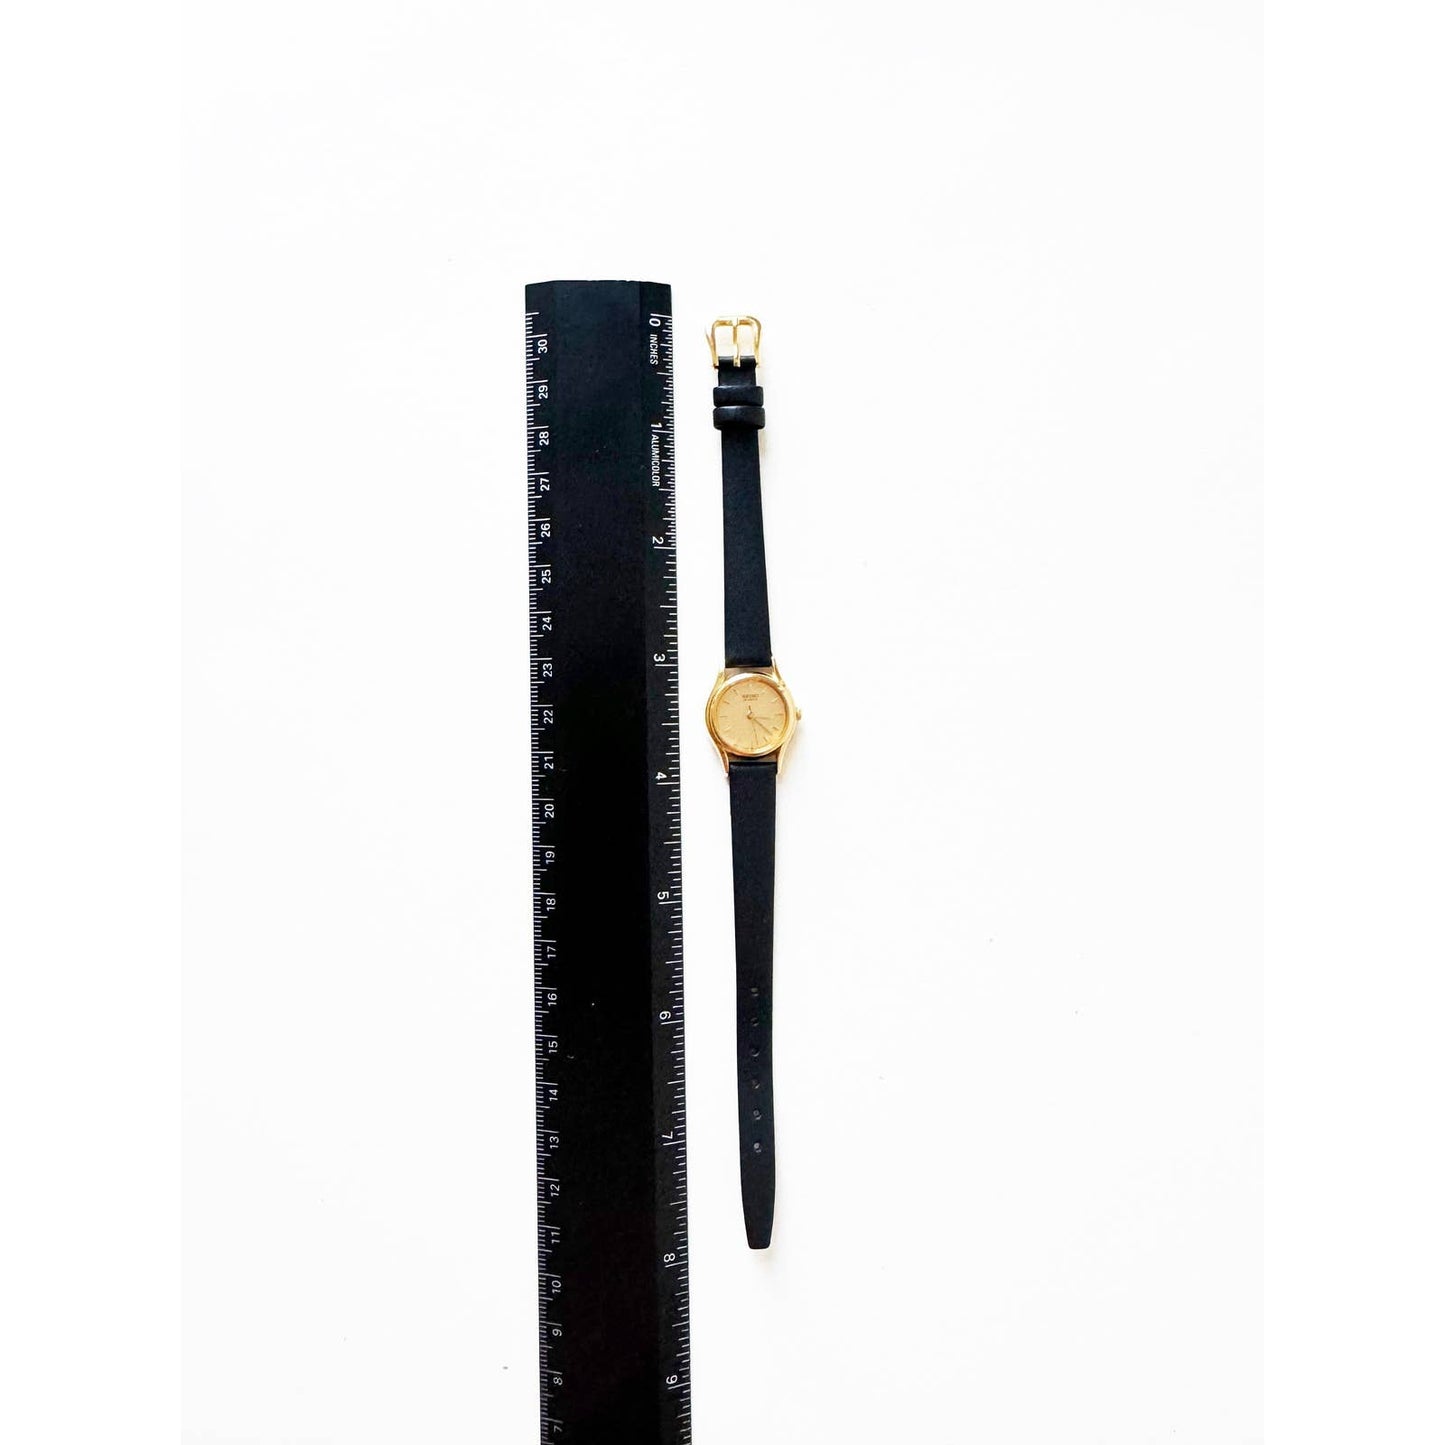 Vintage Leather Watch Black and Gold Details | Seiko